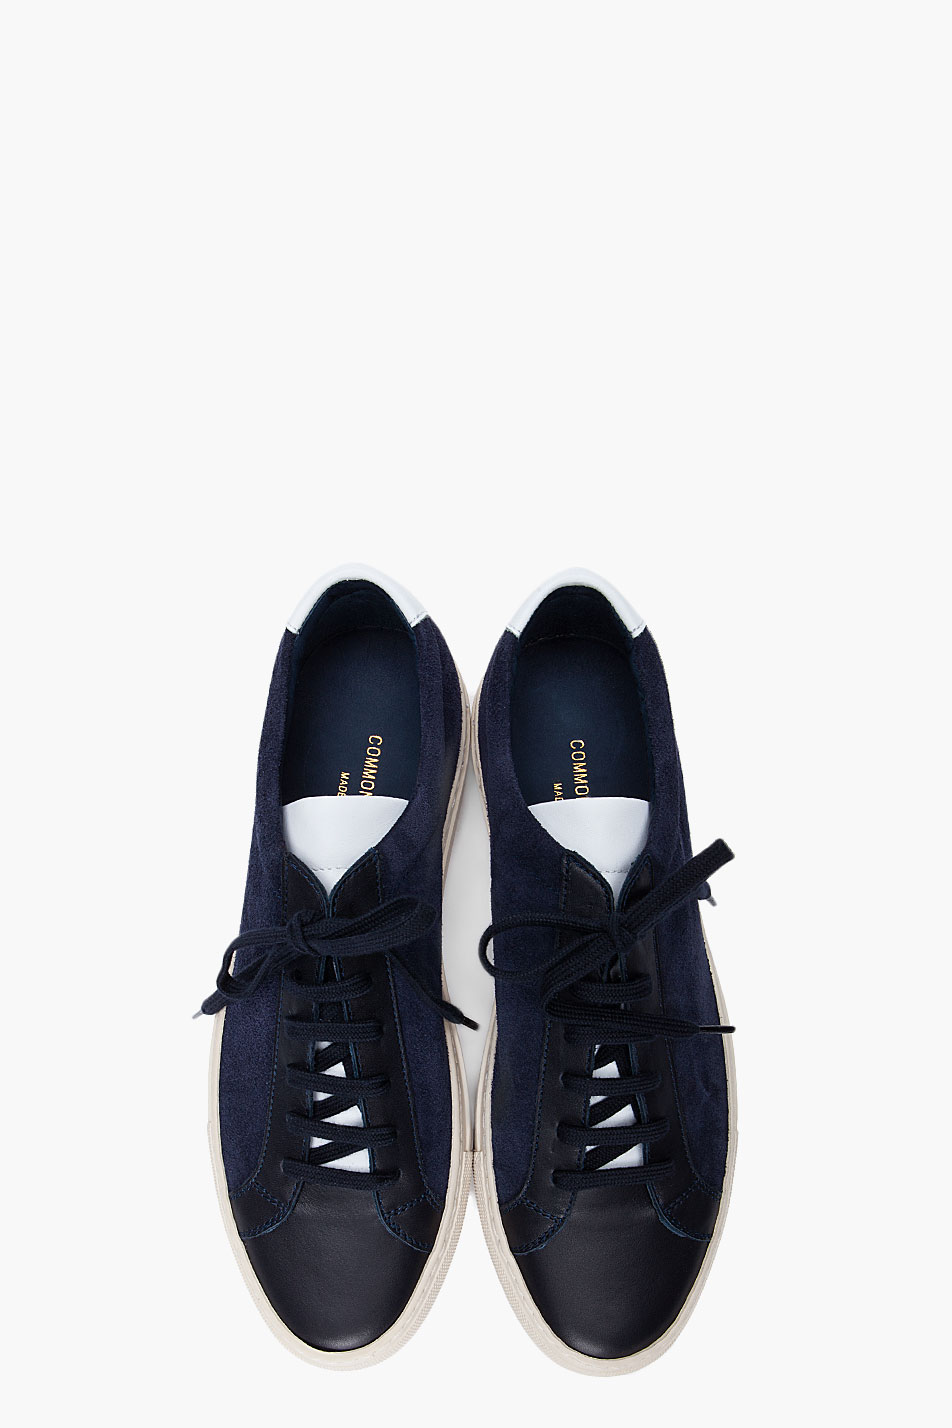 Lyst - Common Projects Navy Suede Vintage Sneakers in Blue for Men